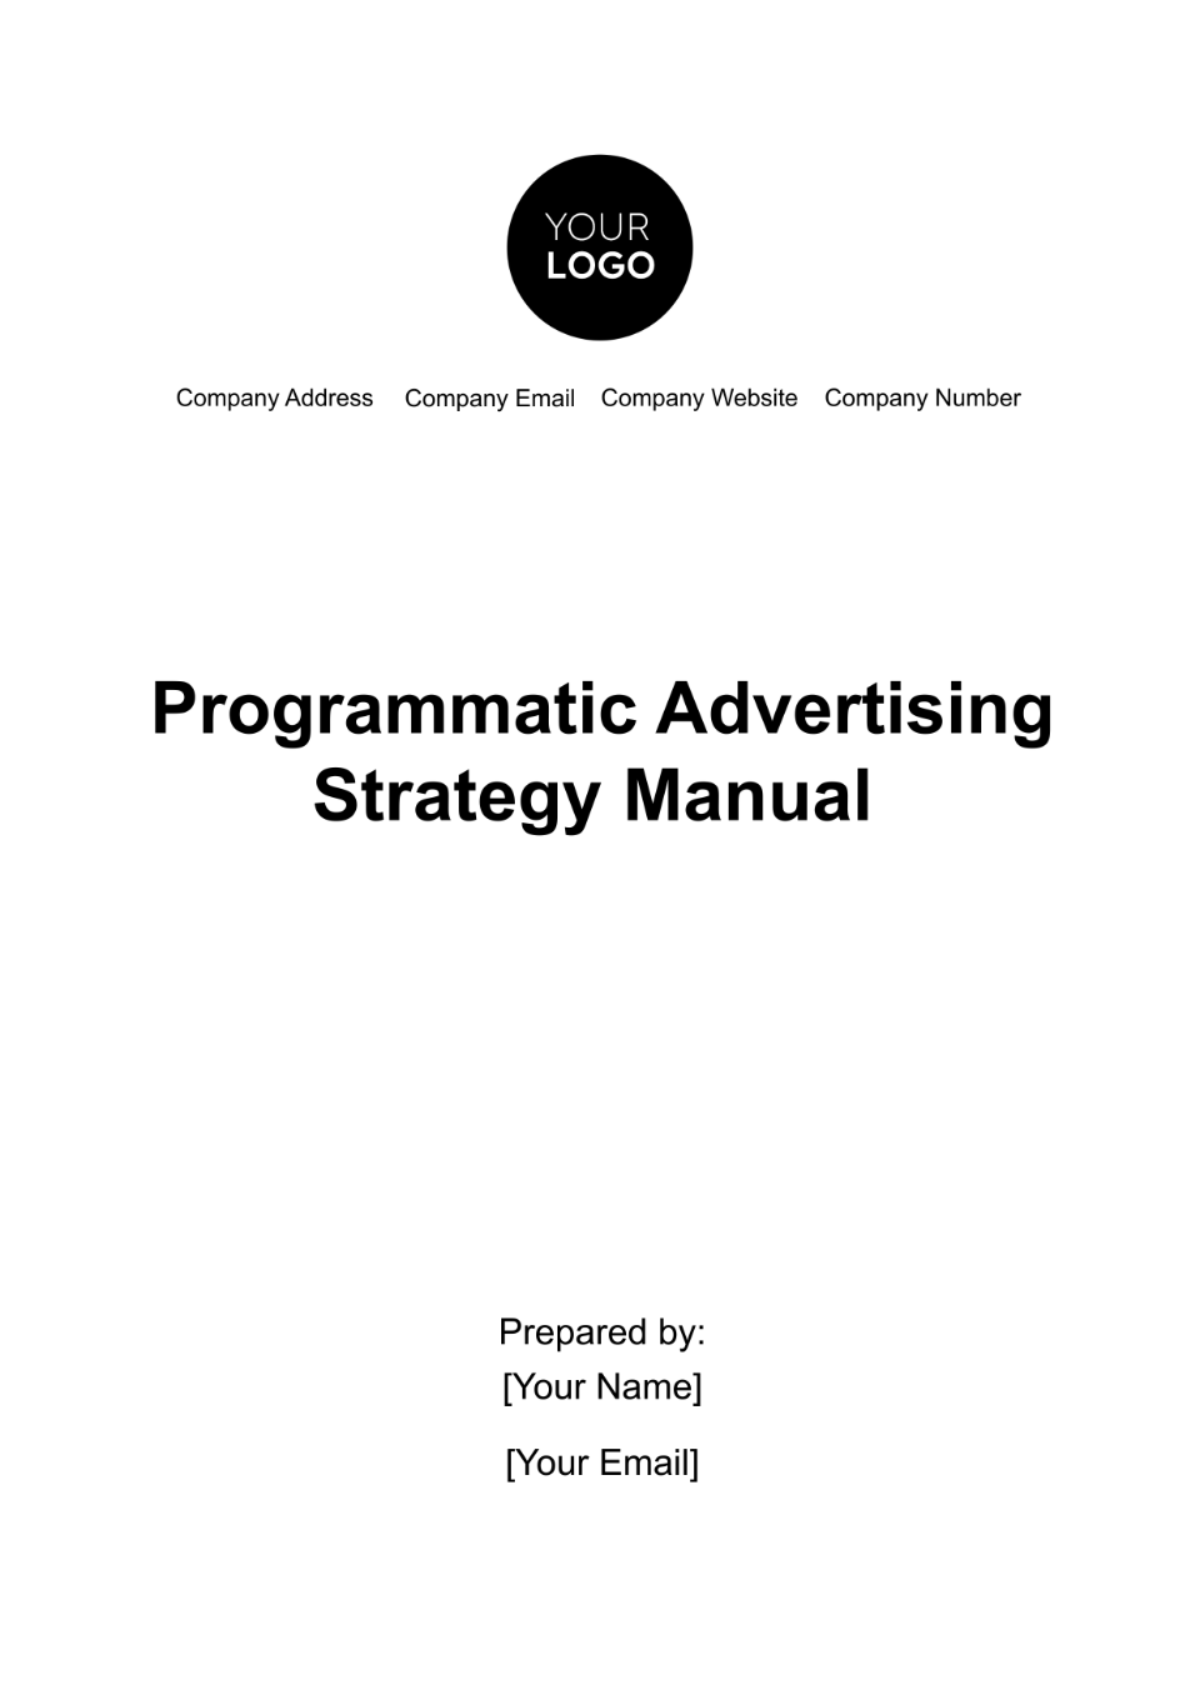 Free Programmatic Advertising Strategy Manual Template